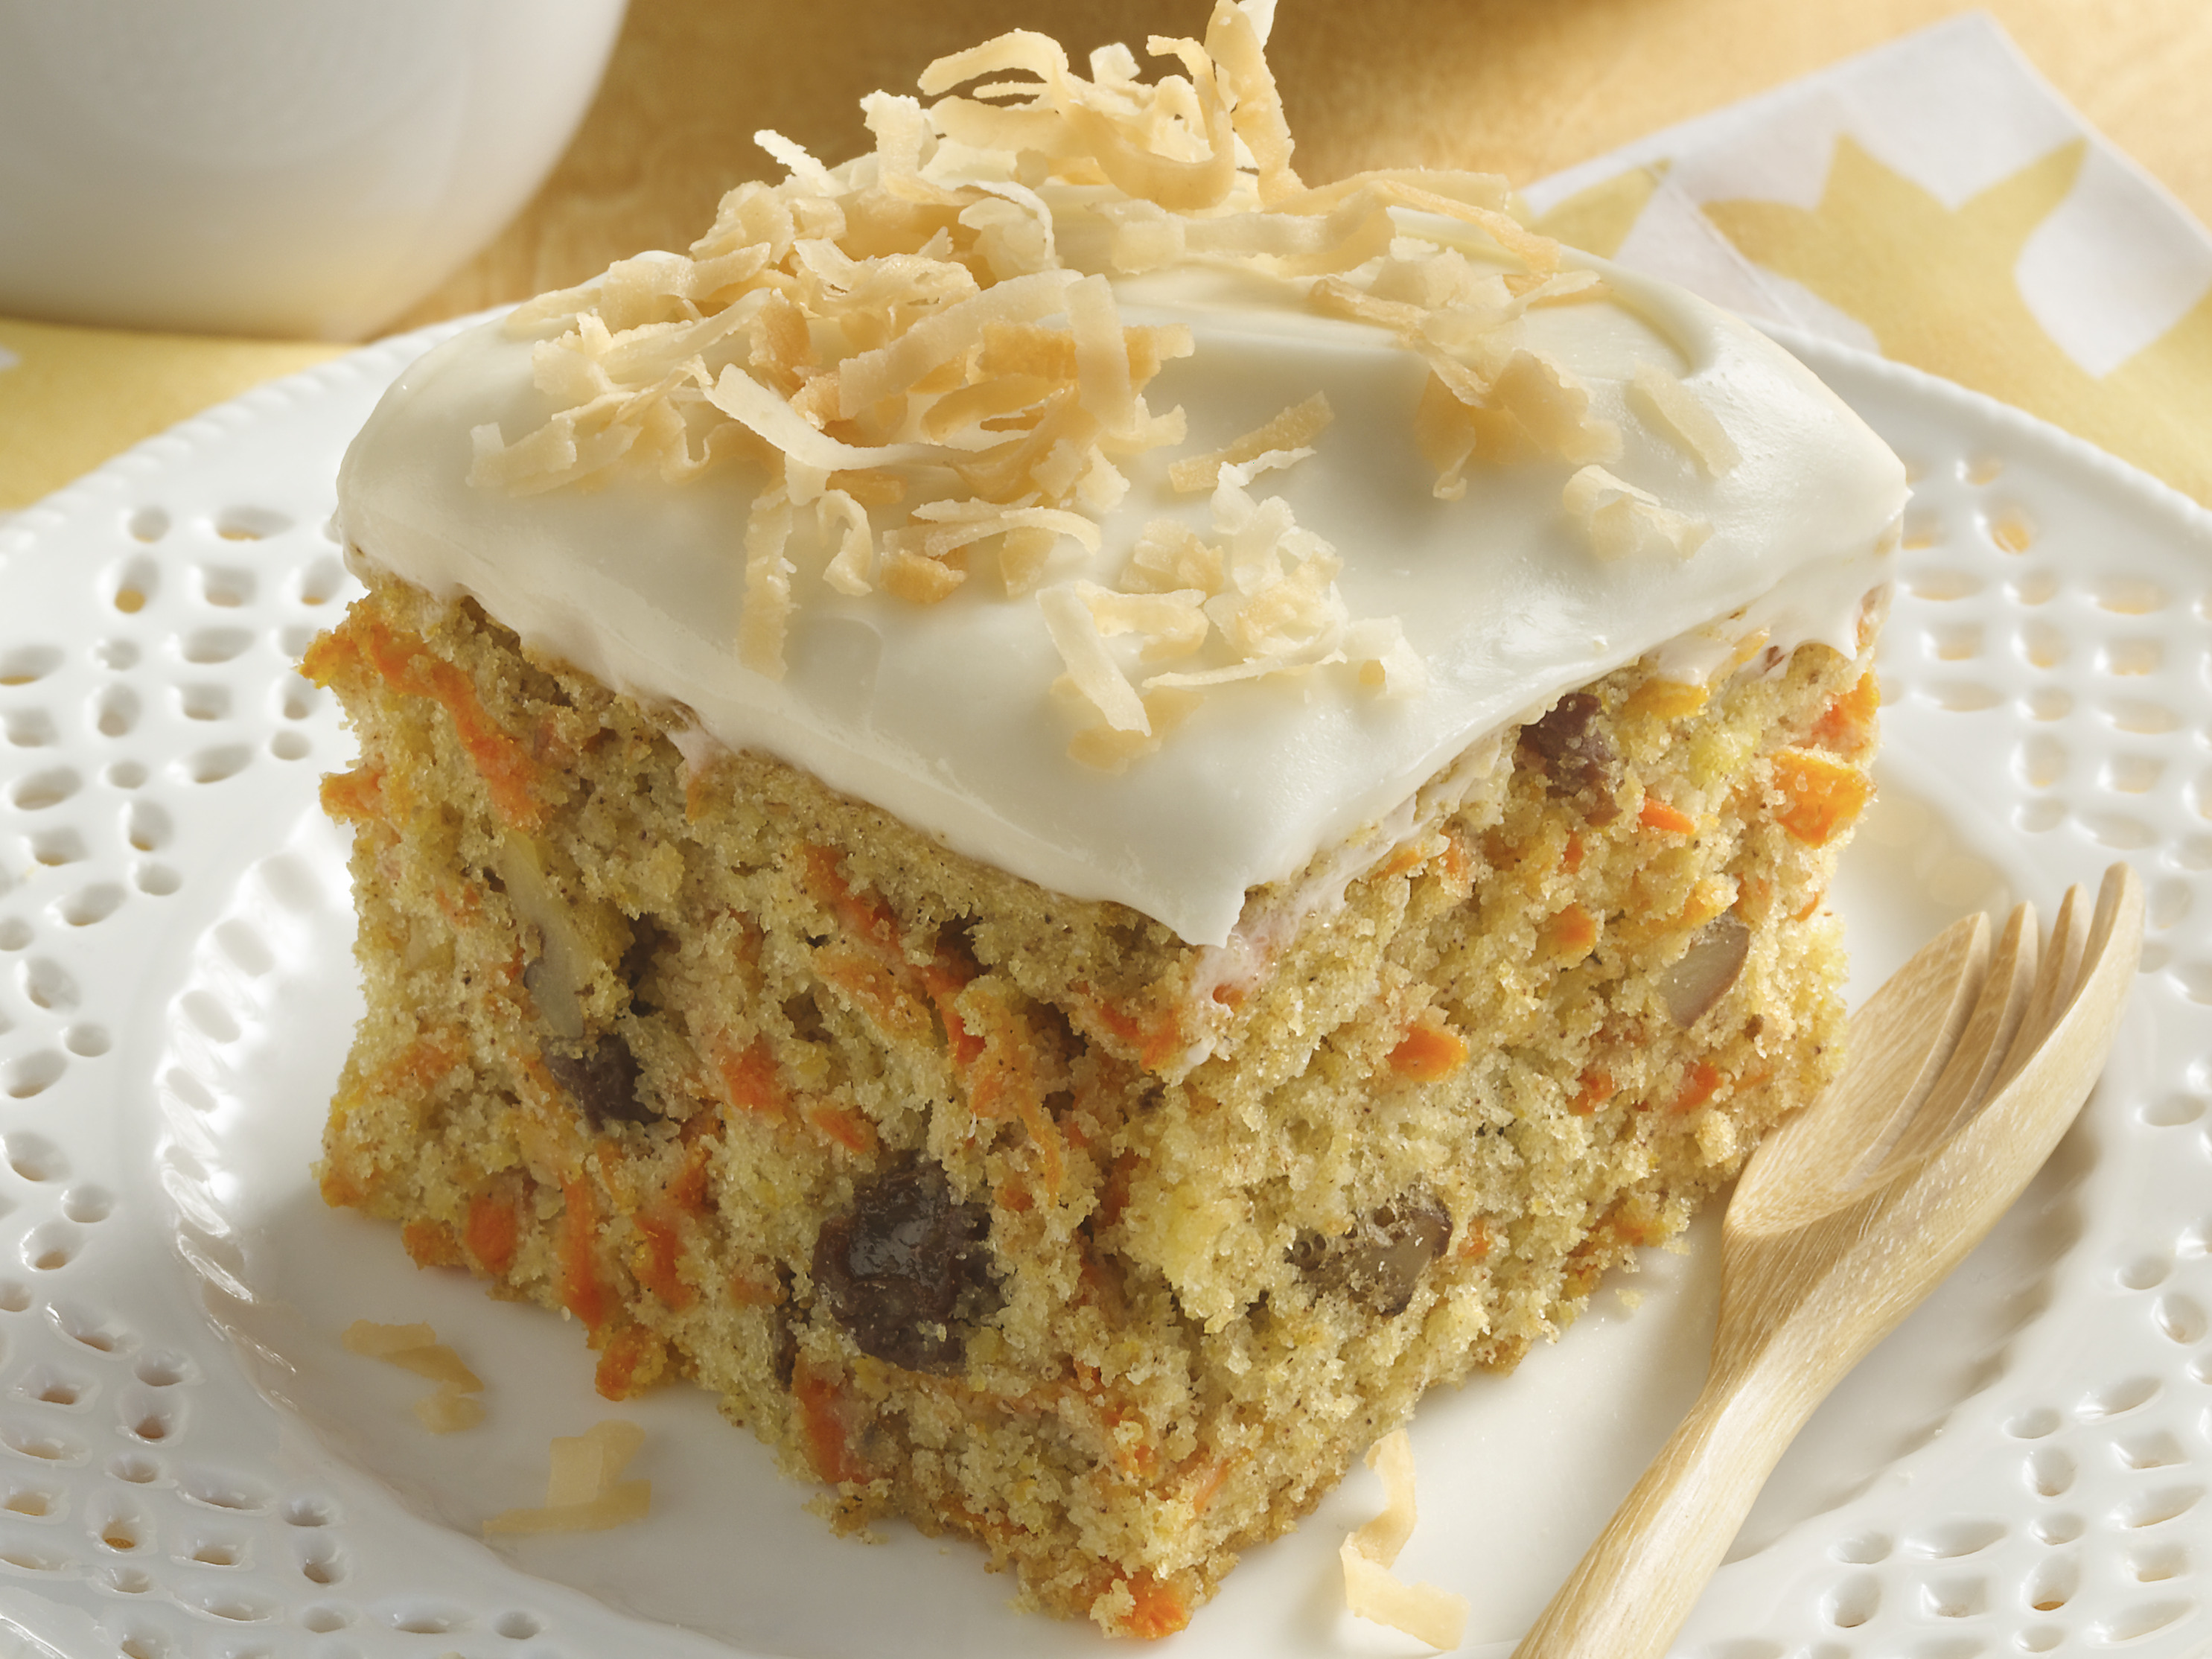 Who loves carrot cake, and why? - Quora